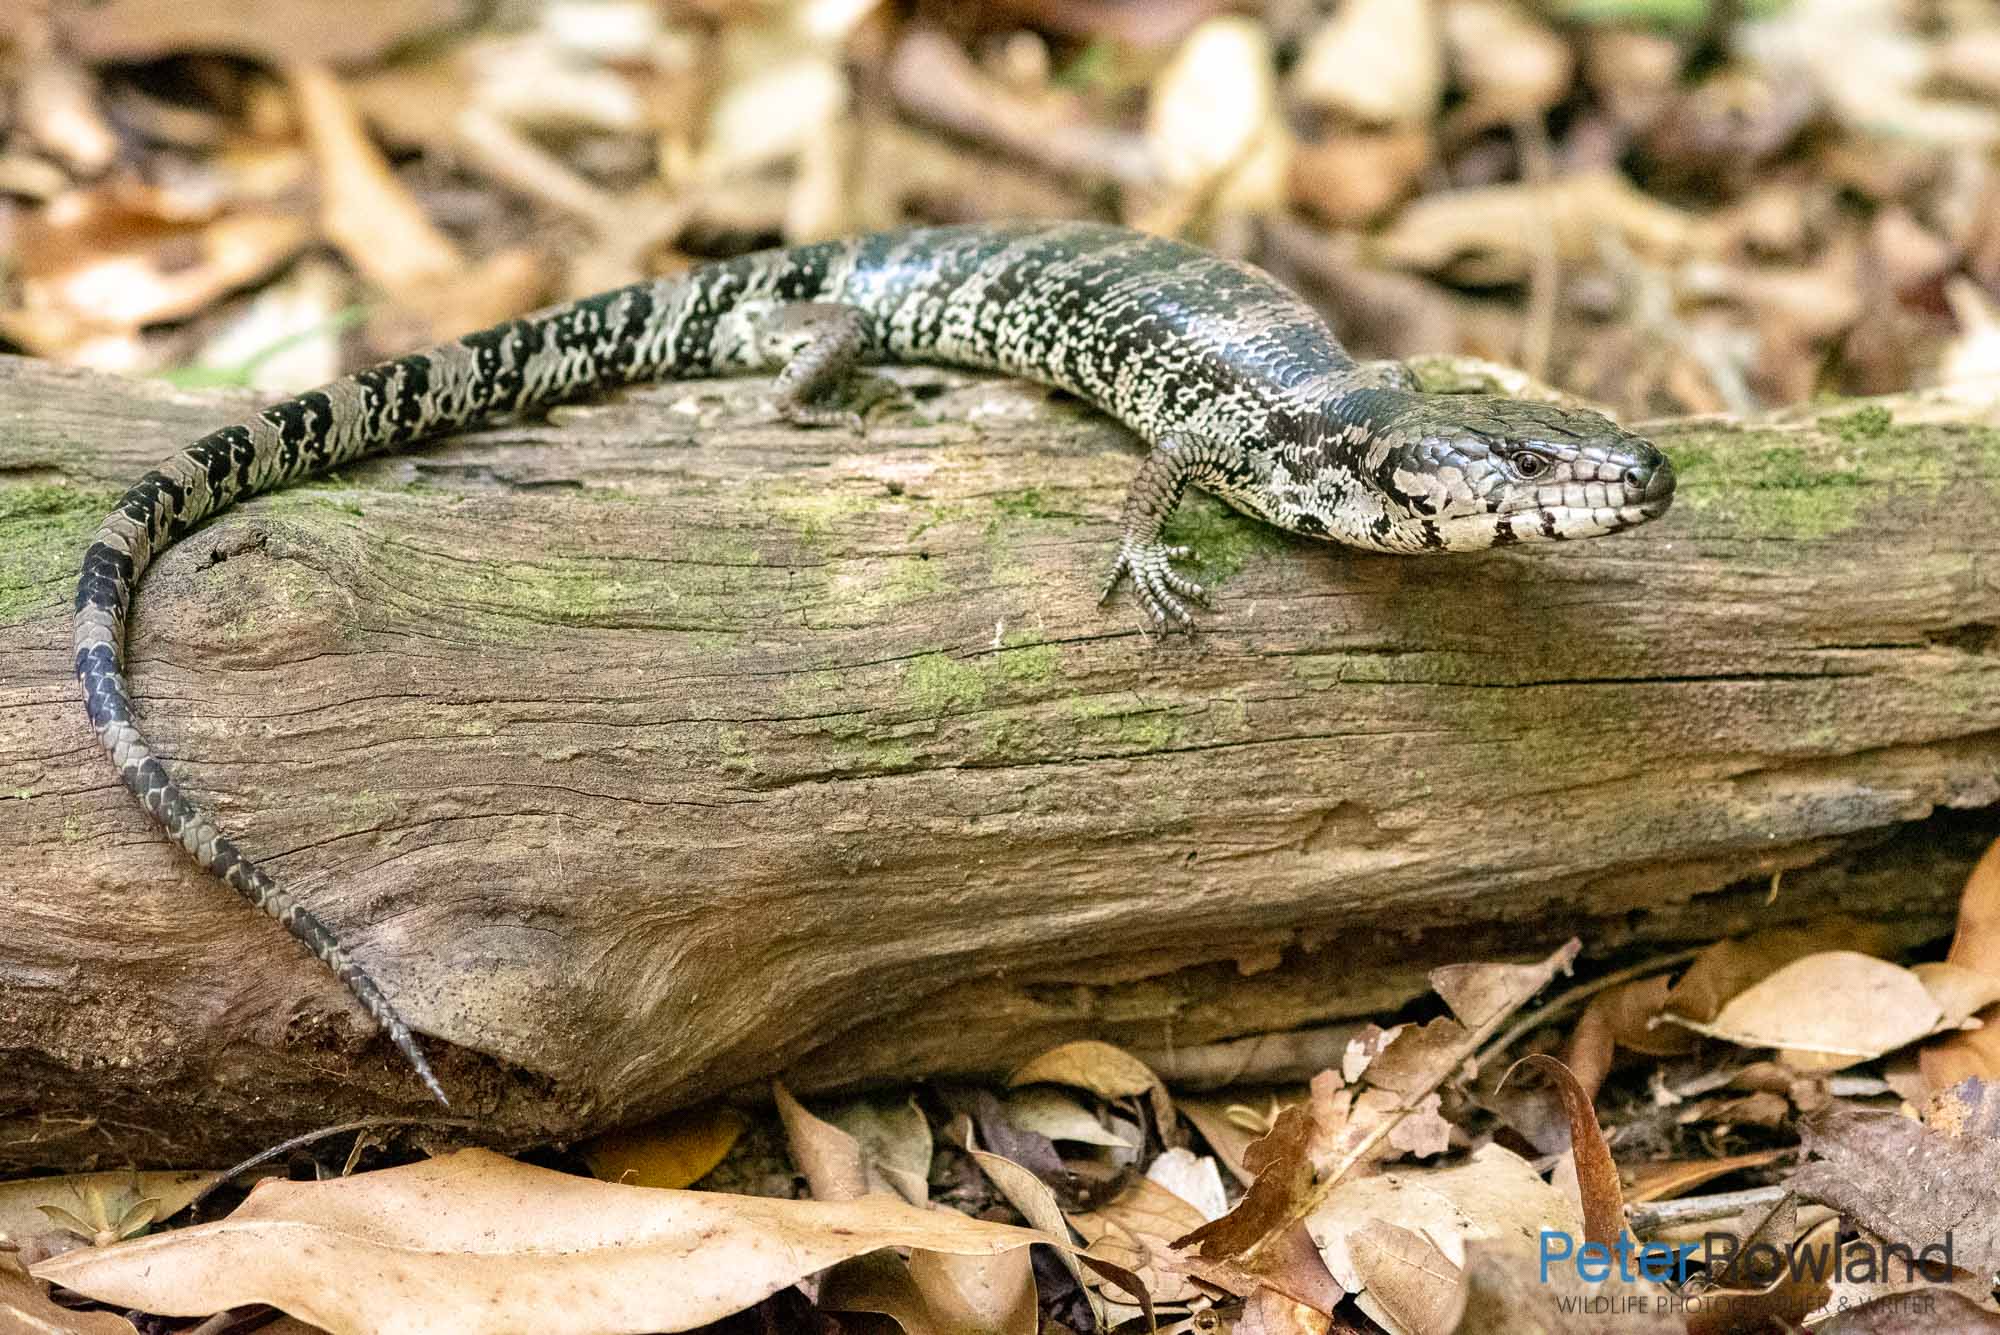 Pink-tongue Lizard climbing over a fallen tree branch on the forest floor. [Photographed by Peter Rowland]